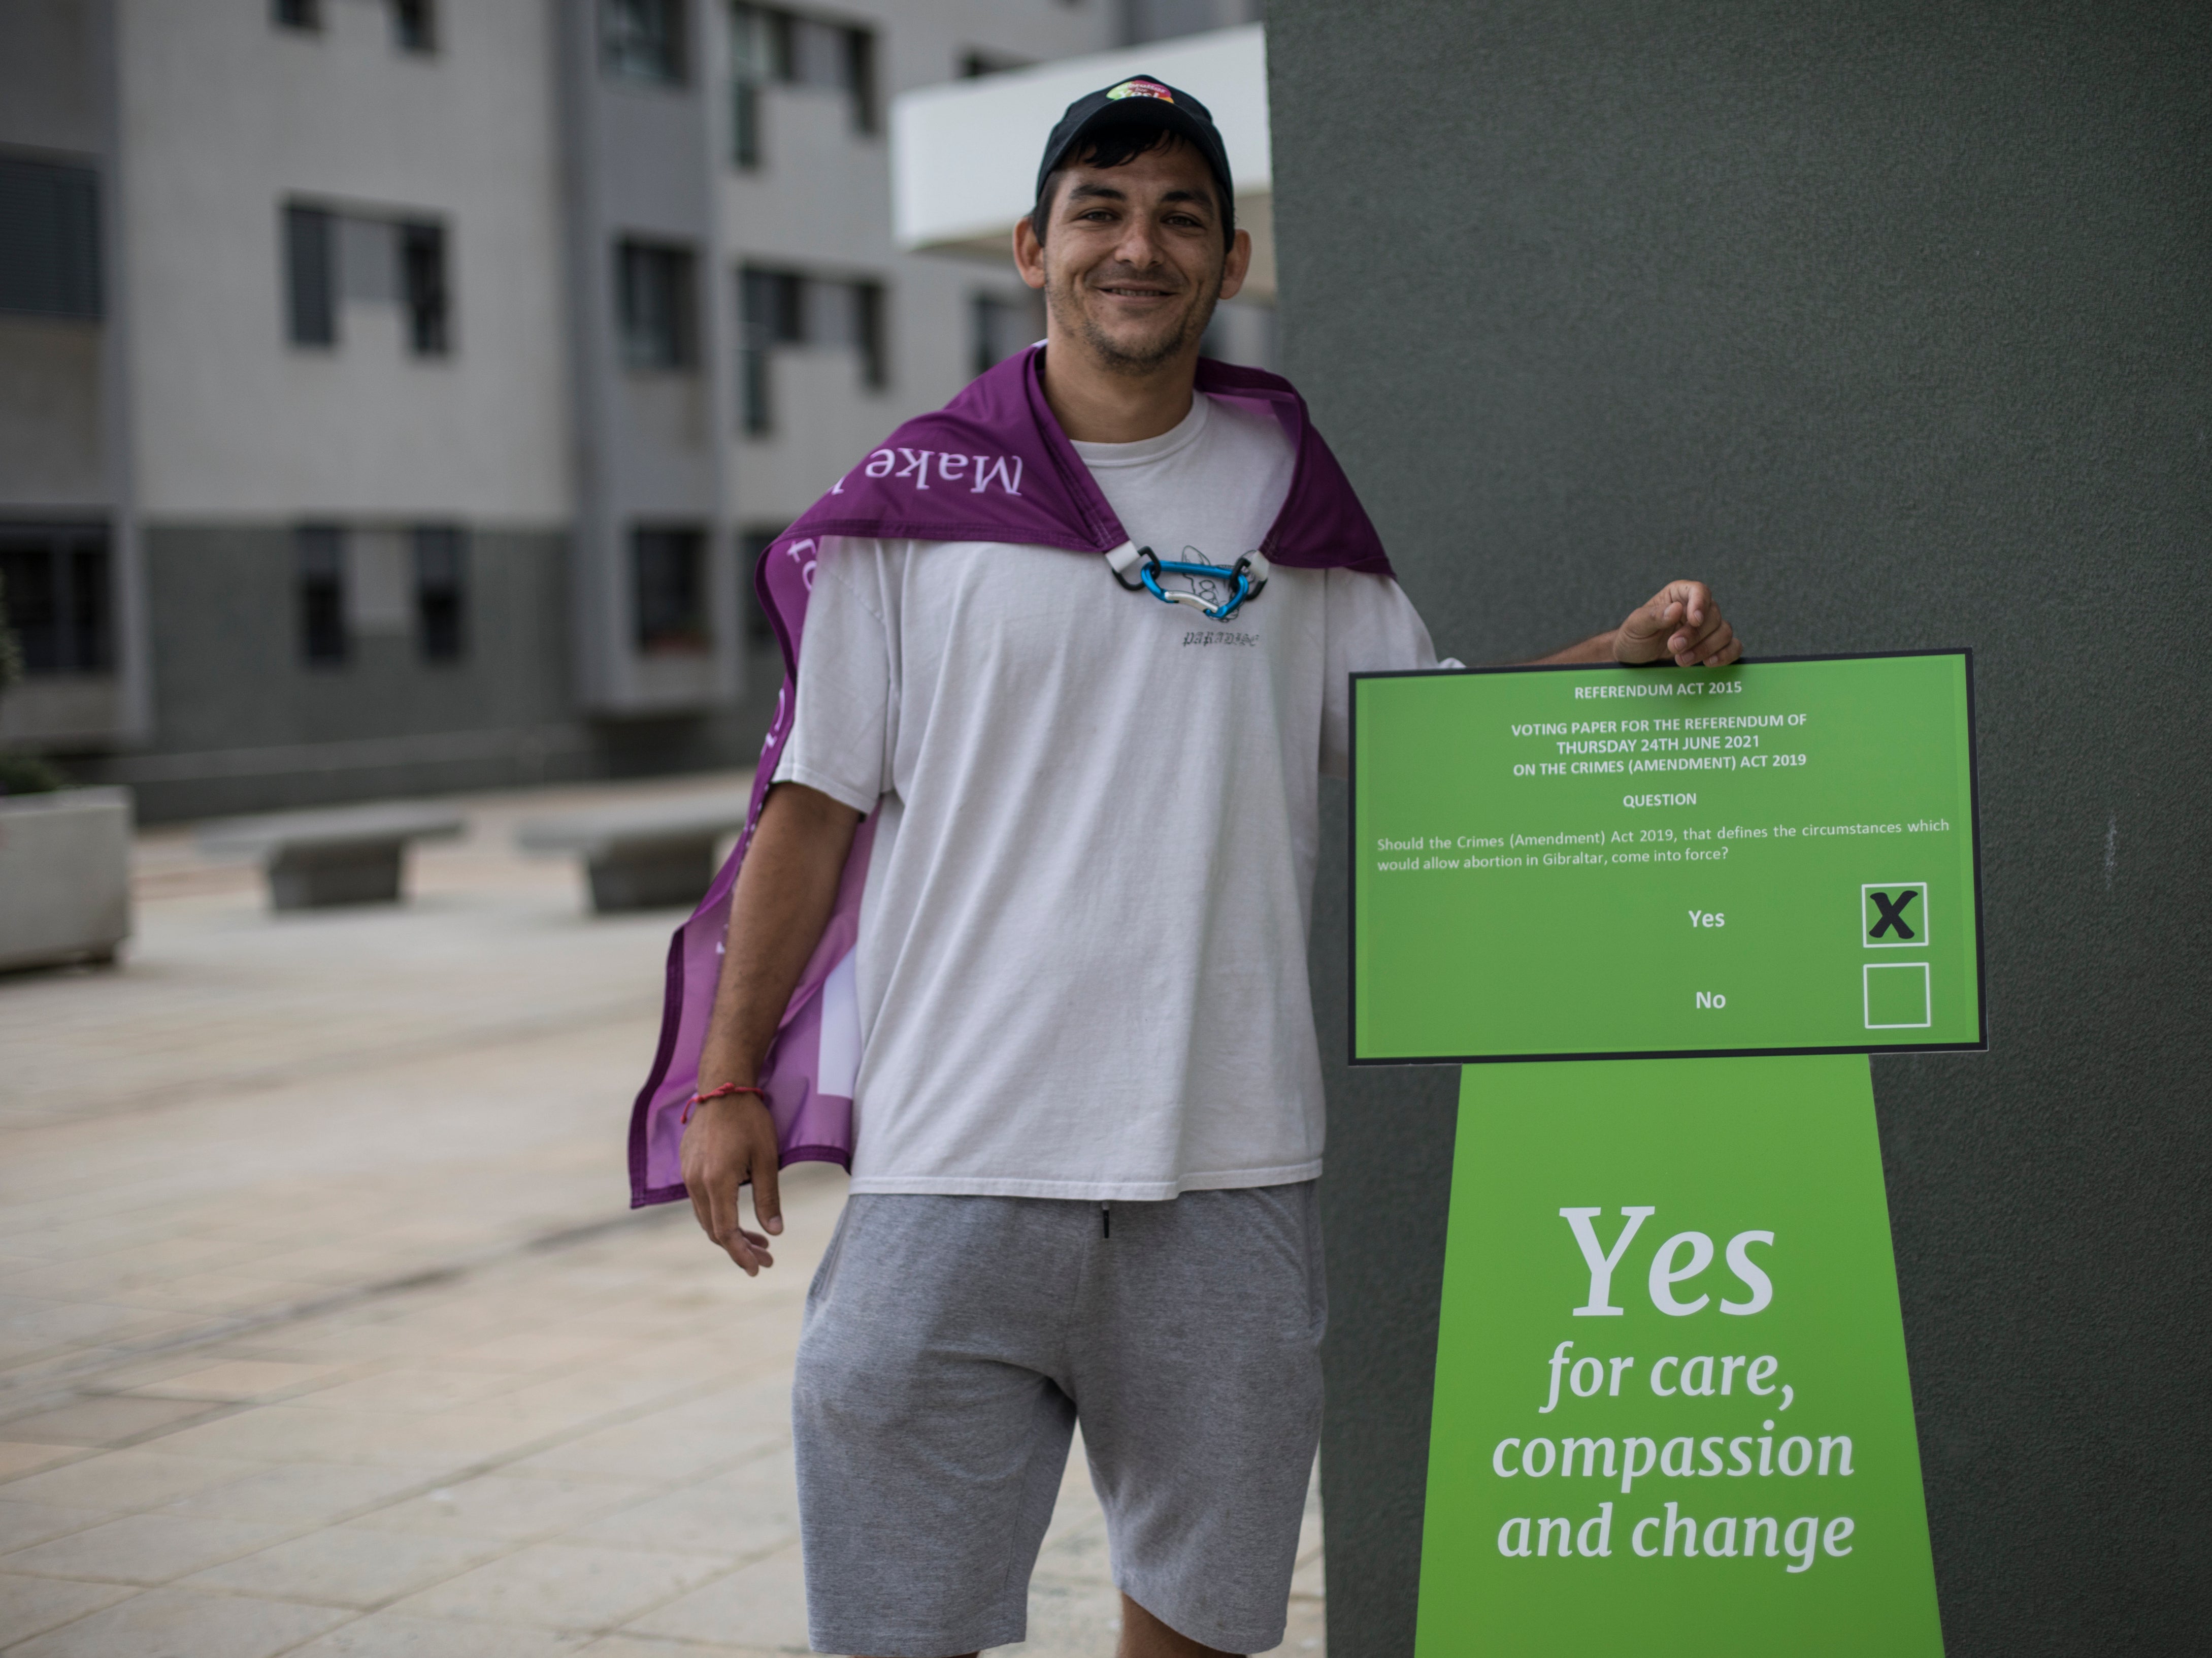 Gibraltarians head to the polls to vote on changing the country’s restrictive abortion laws